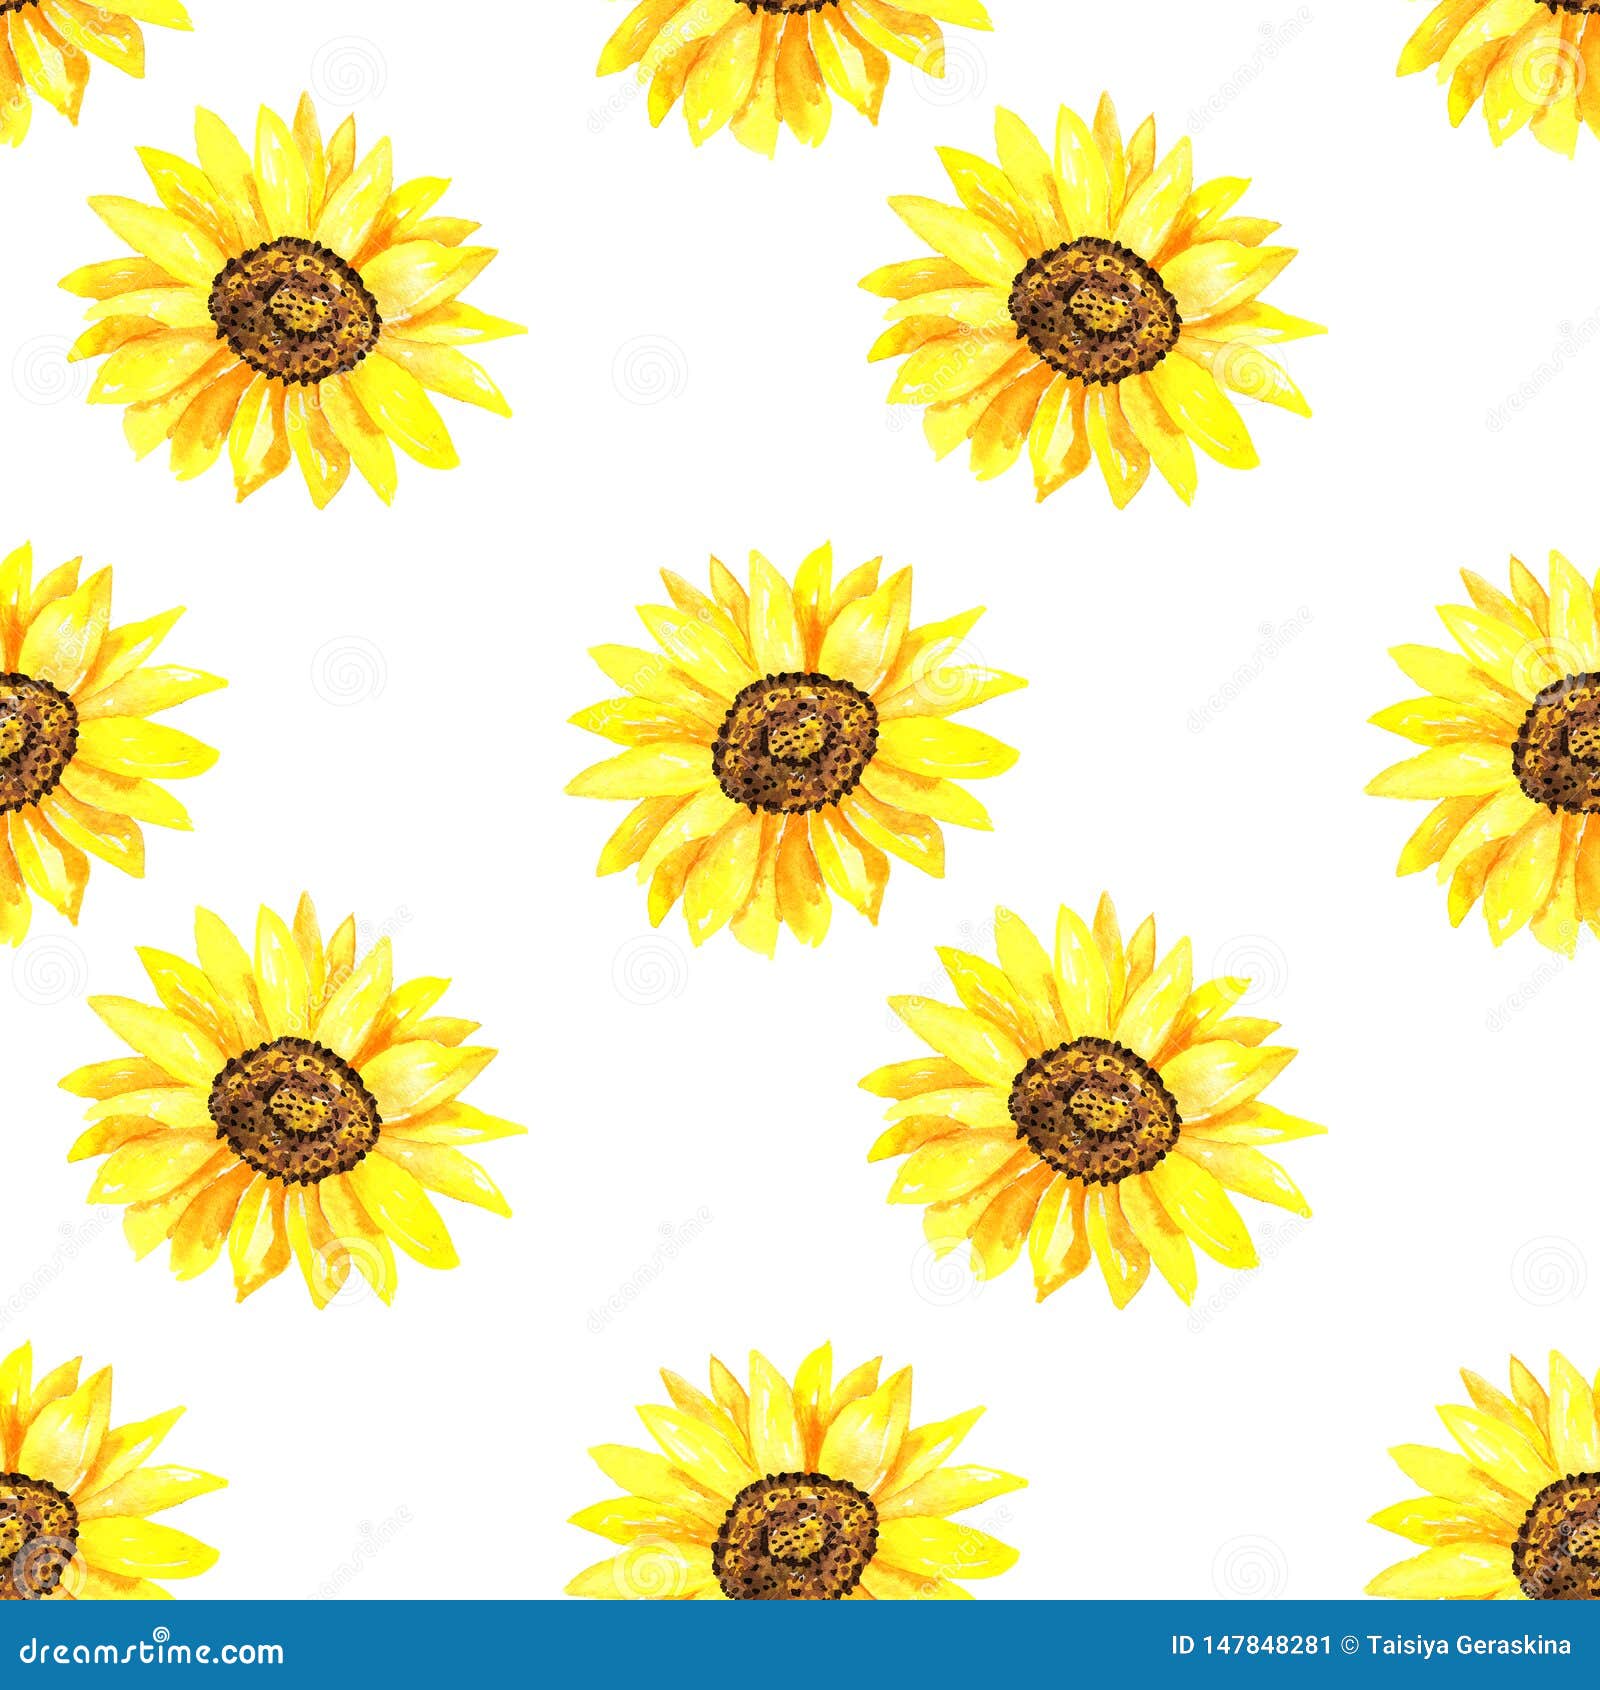 Bright Sunflower. Seamless Pattern. Hand Drawn Watercolor Illustration.  Texture for Print, Fabric, Textile, Wallpaper. Stock Illustration -  Illustration of design, branch: 147848281